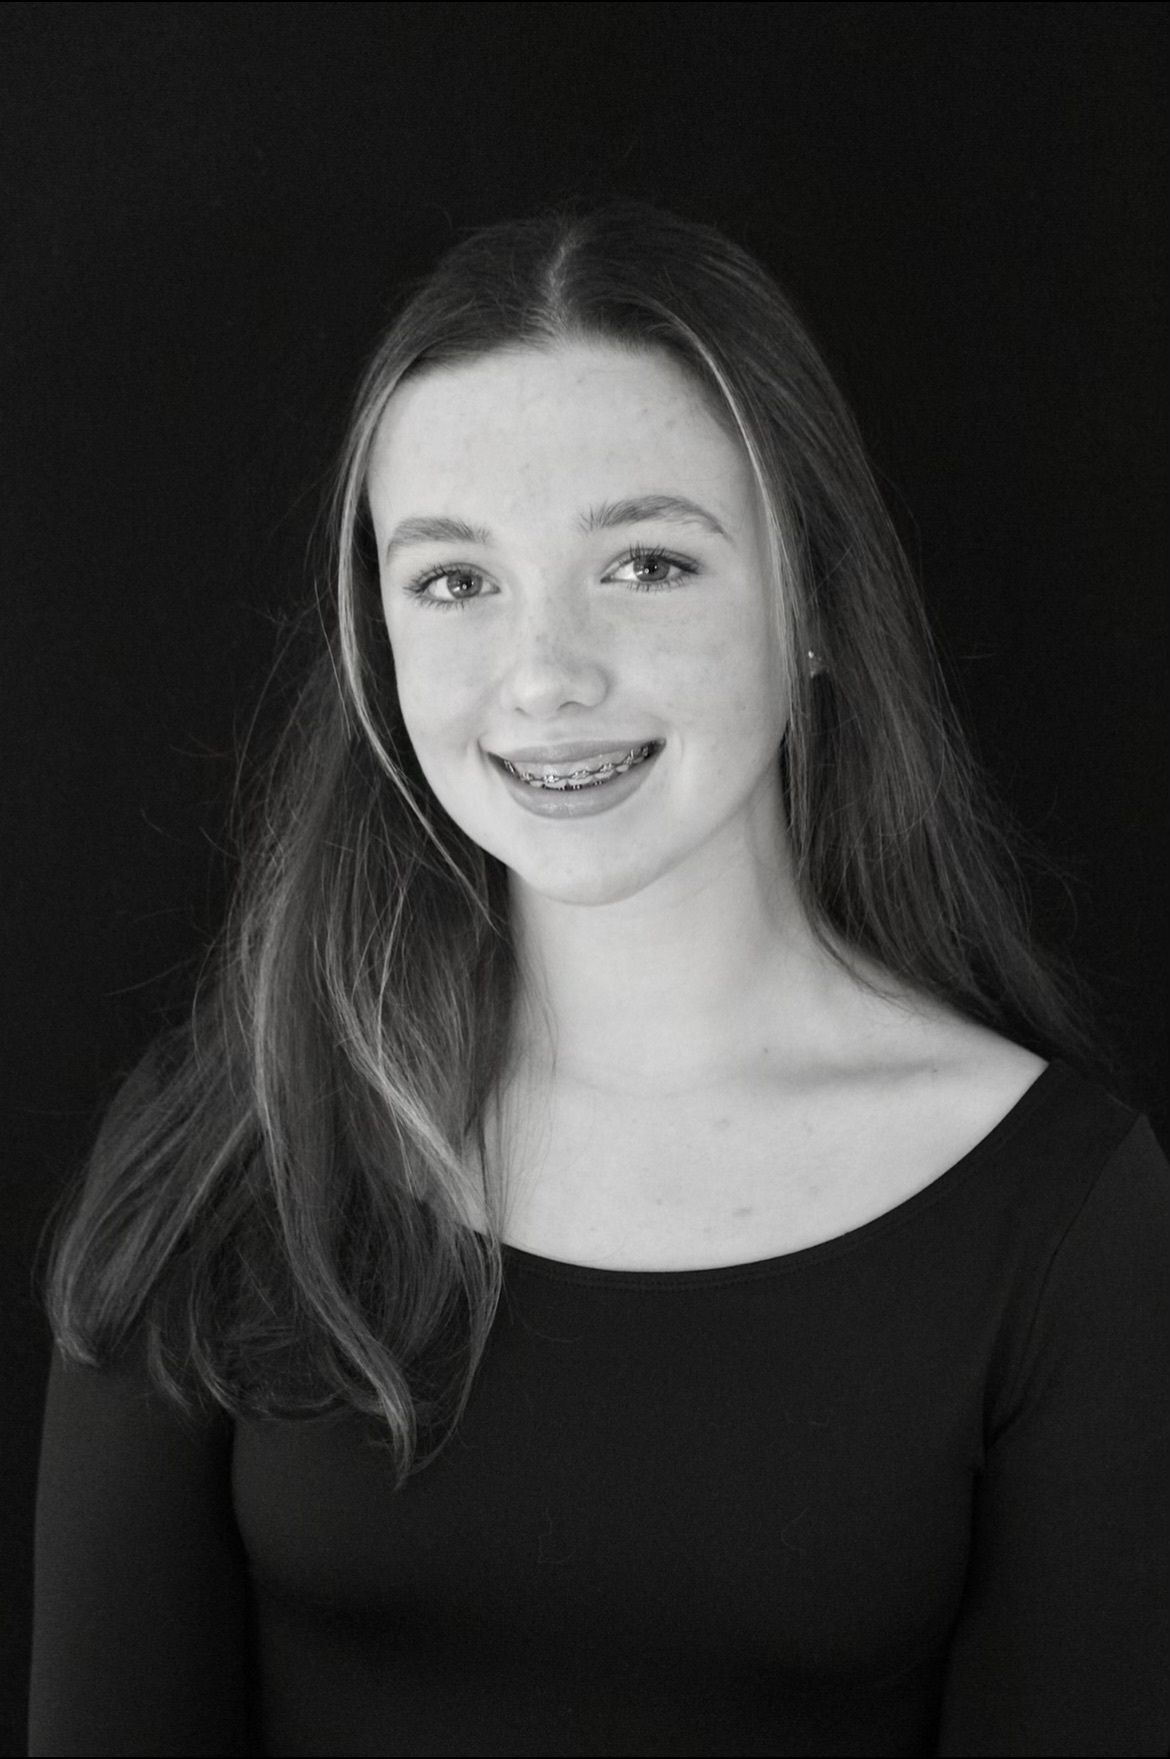 Avery McClelland will share the role of Sugar Plum Fairy with her fellow Studio 3 ballerinas Maya Leathers and Bianca Hommert.